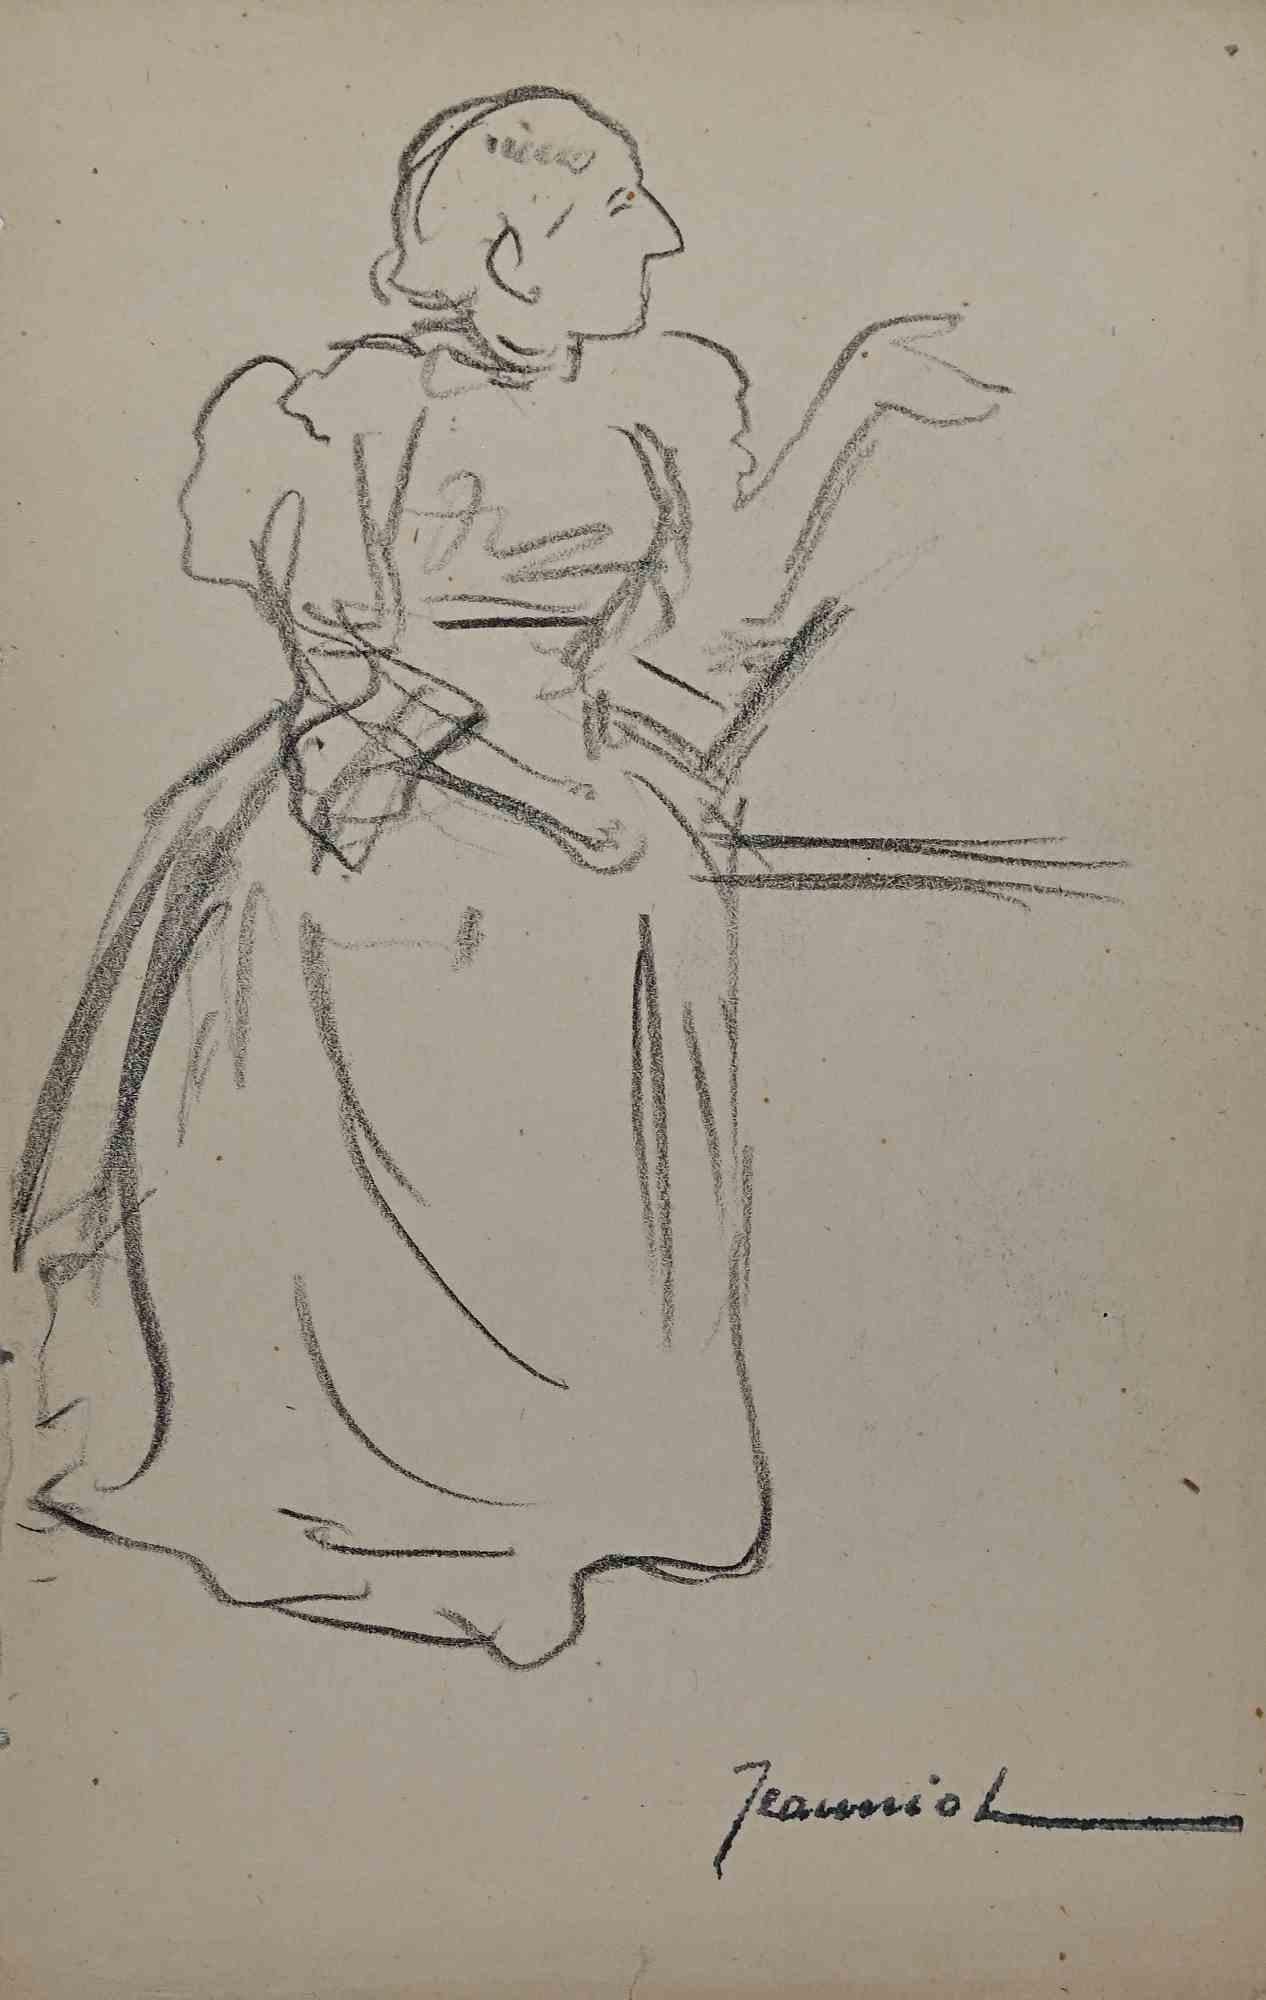 Figure is an original Drawing on paper realized by the painter Pierre Georges Jeanniot (1848-1934).

Drawing in Pencil.

Hand-signed on the lower.

Good conditions except for aged margins.

The artwork is represented through deft and quick strokes